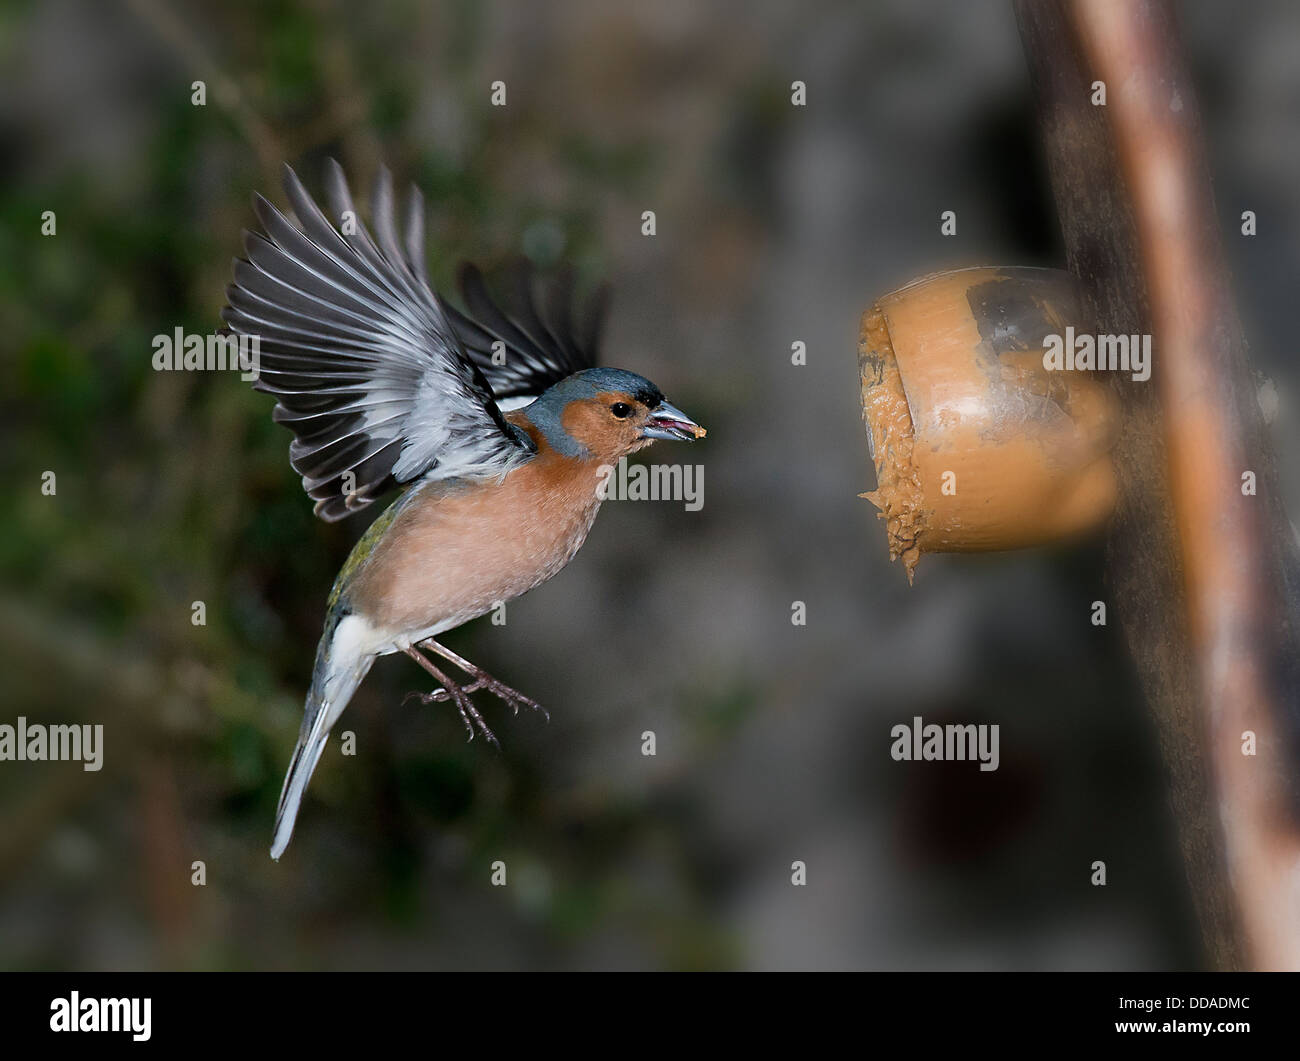 a chaffinch feeding on peanut butter captured in flight Stock Photo